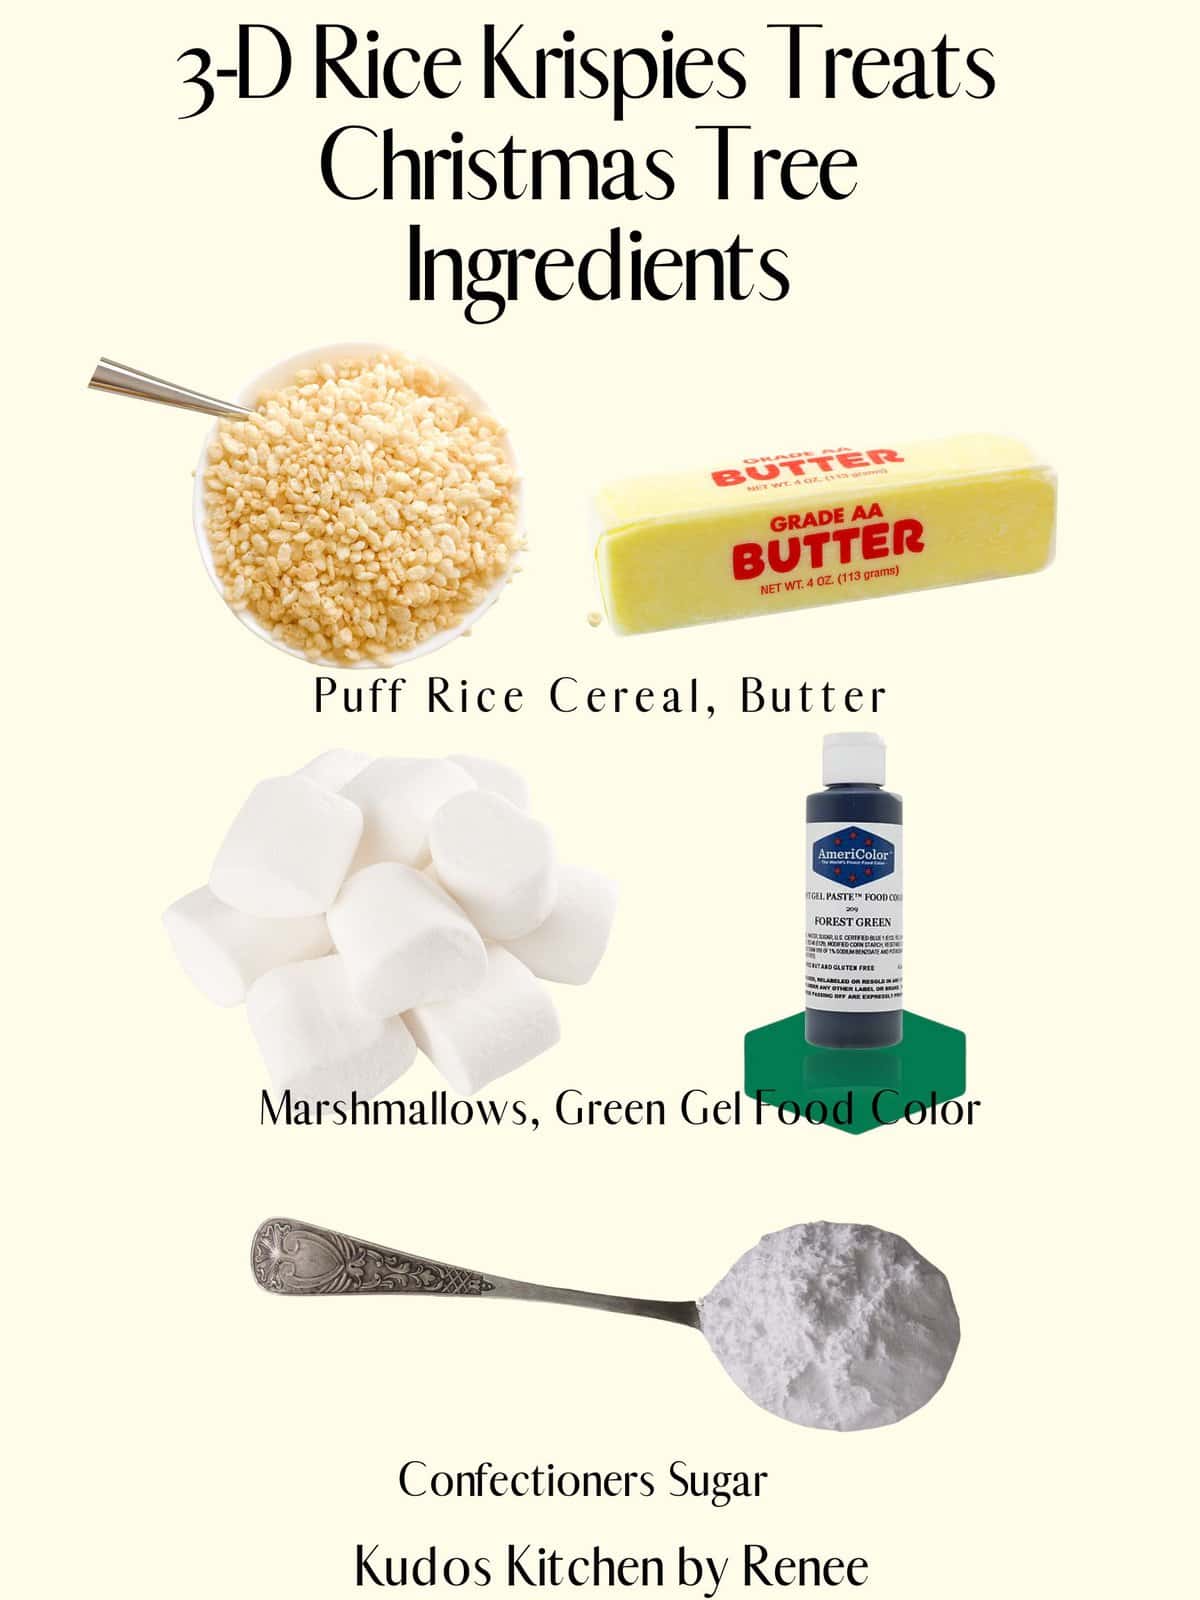 A visual ingredient list for making a 3D Rice Krispies Treats Christmas Tree.